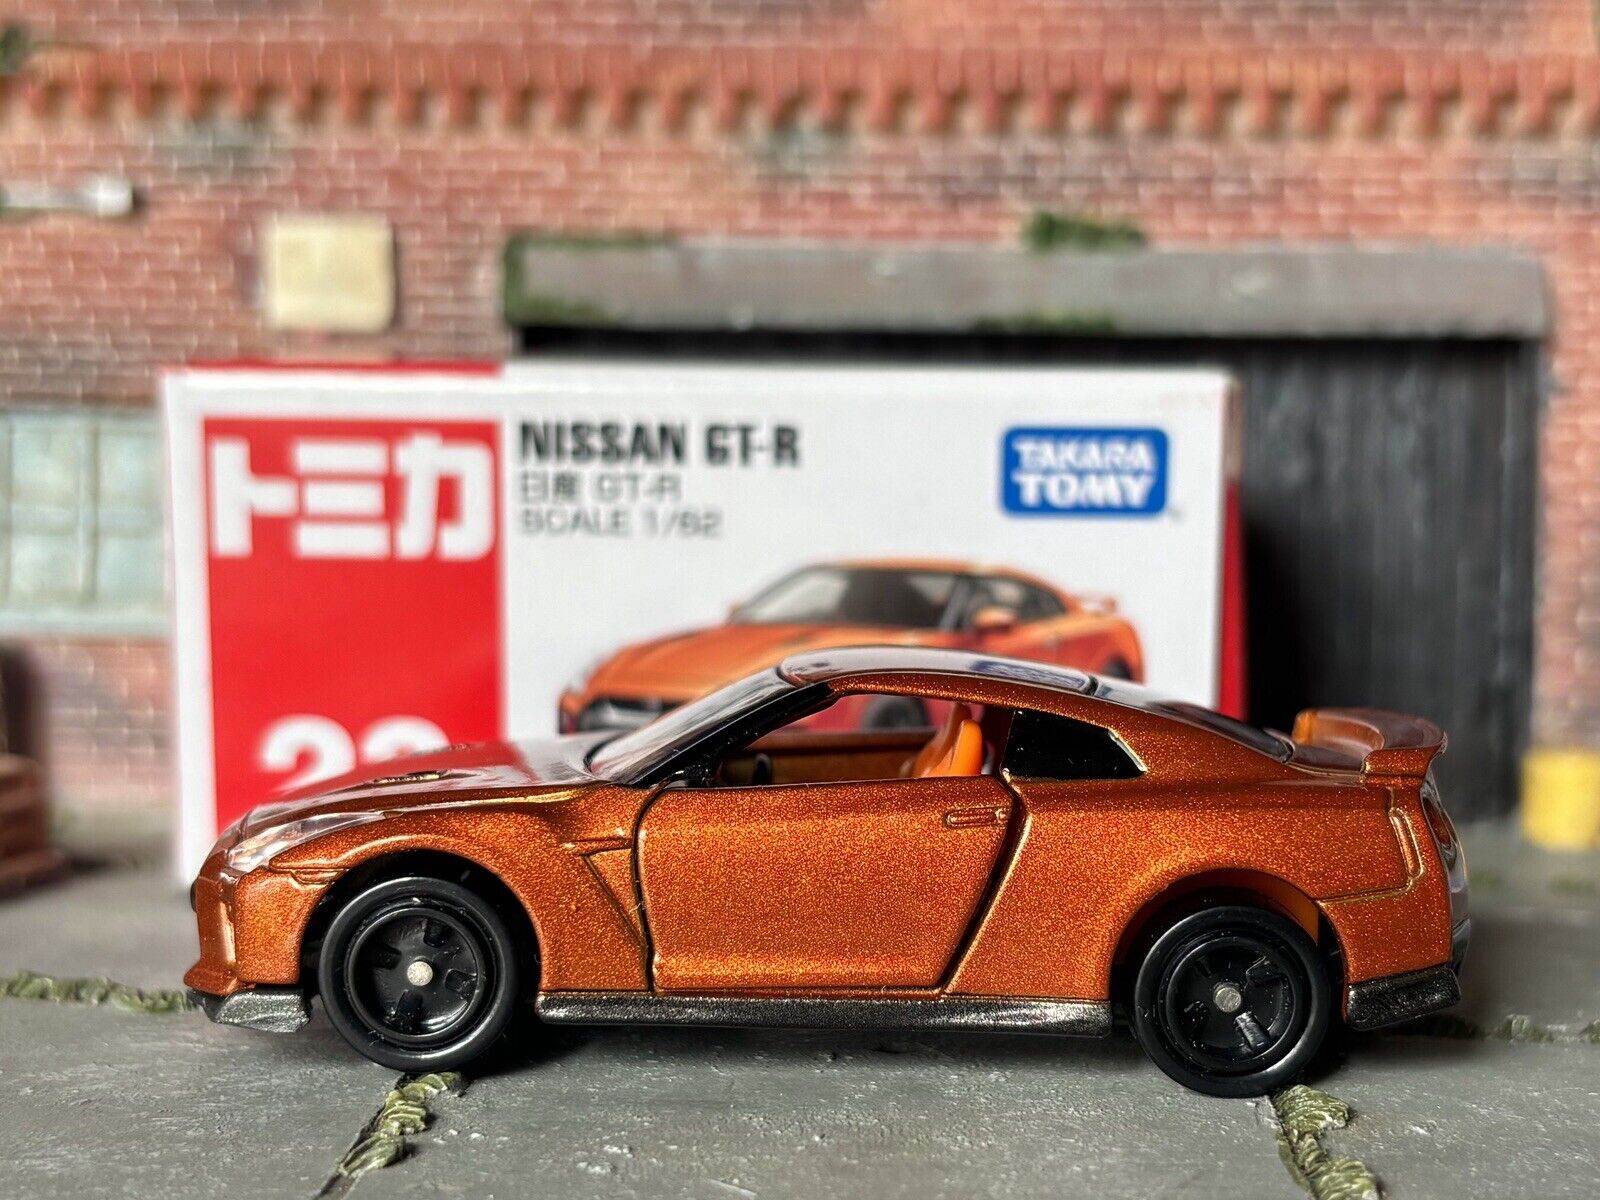 TOMICA Takara Tomy No.23 NISSAN GT-R Scale 1/62 Box Included